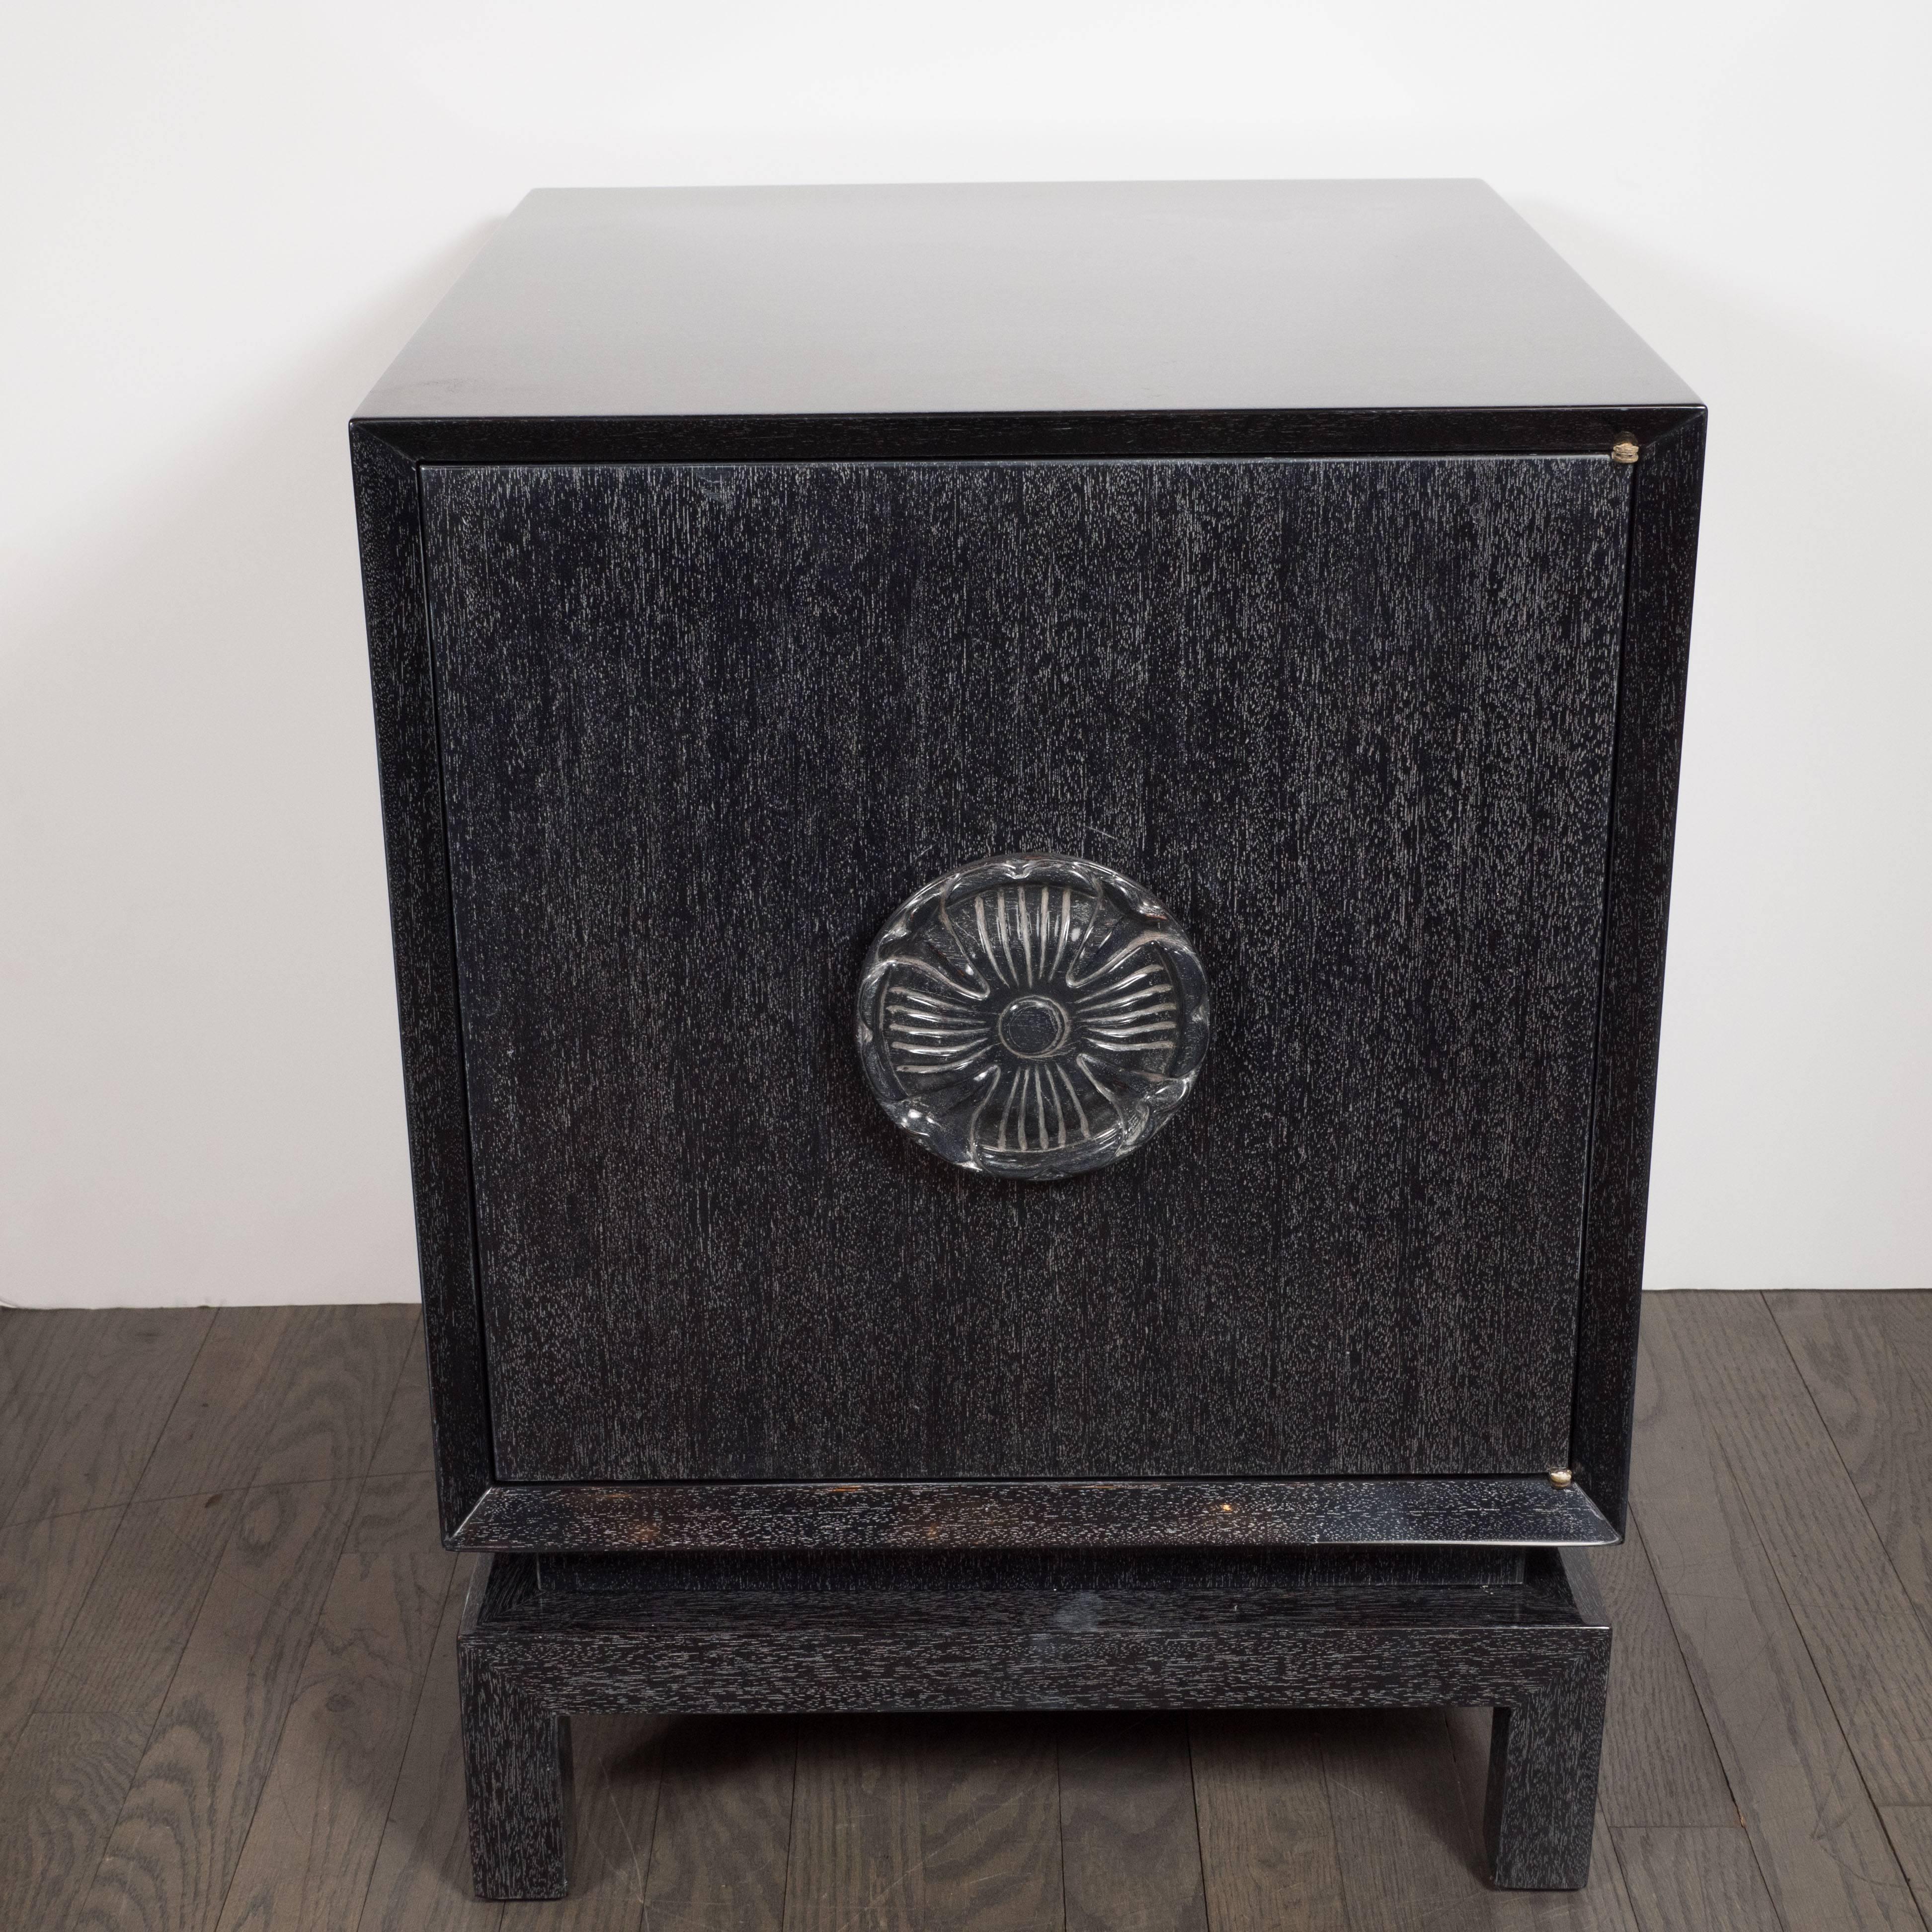 This elegant and stylish pair of nightstands were realized by esteemed Art Deco designer- whose clientele included everyone from Frank Costello and Lucky Luciano to Irving Berlin and Bob Hope- in the United States, circa 1950. They feature a tiered